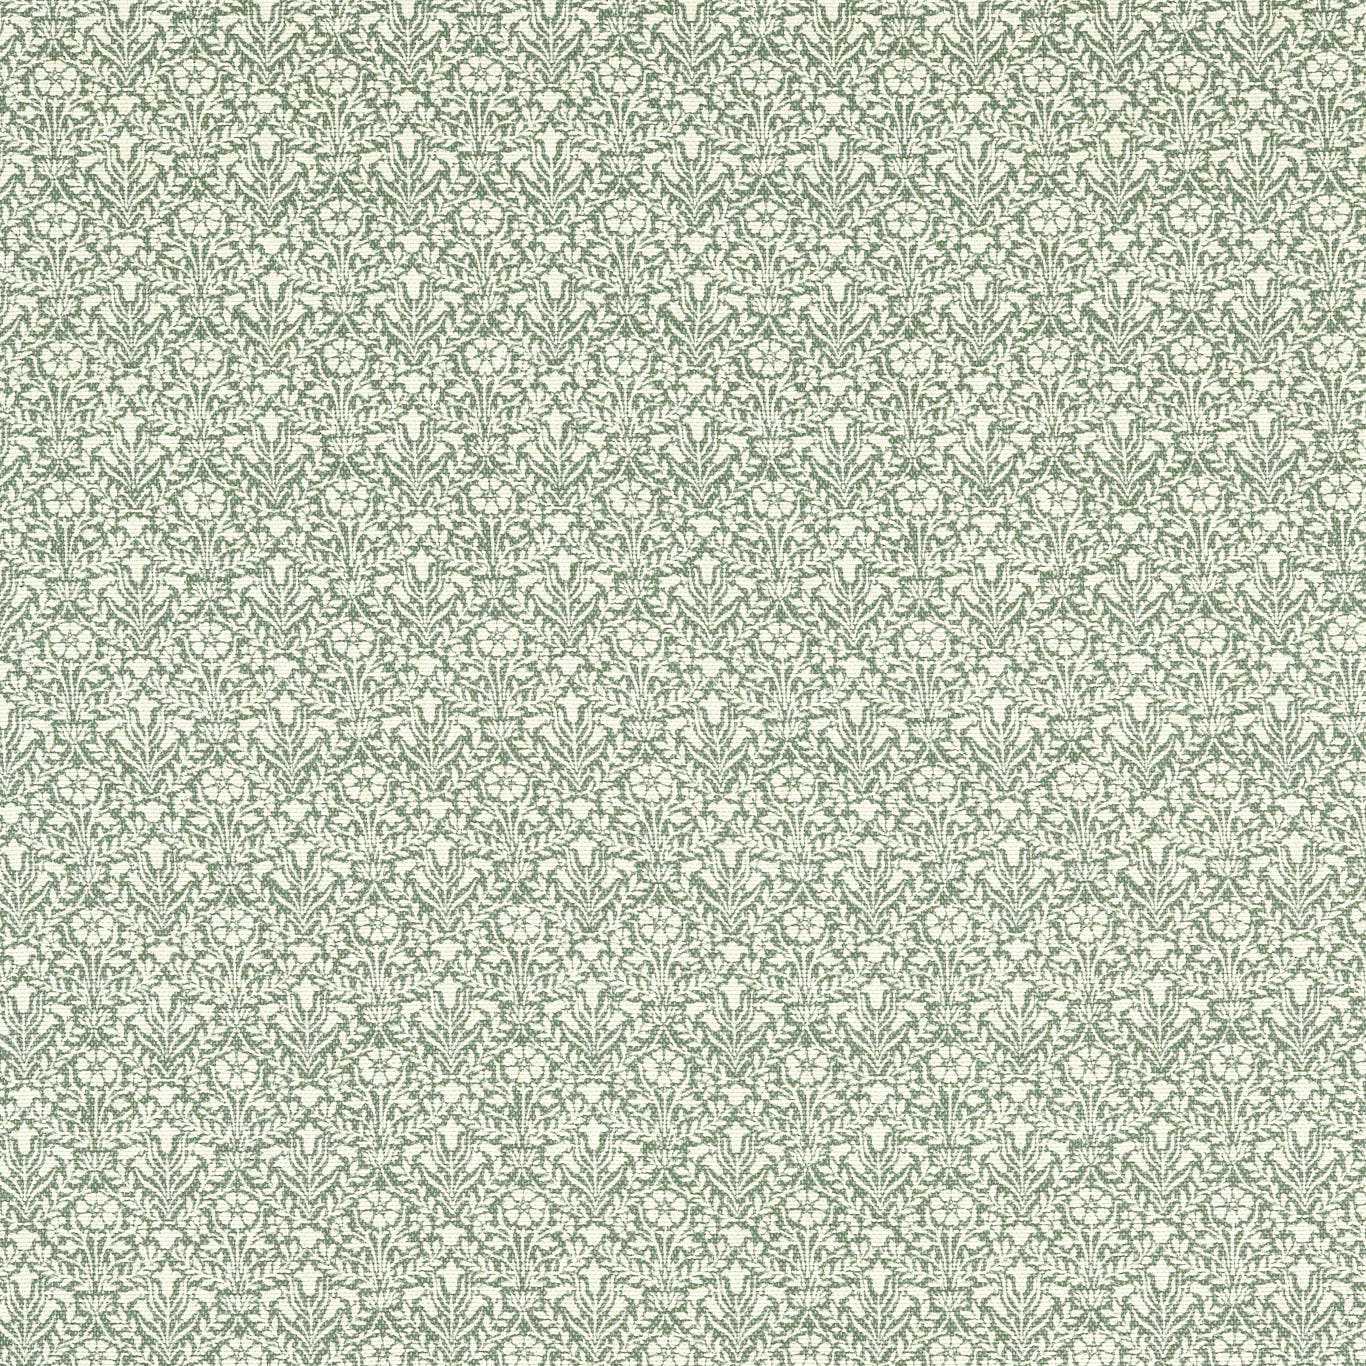 Bellflowers Weave Seagreen Fabric By Morris & Co